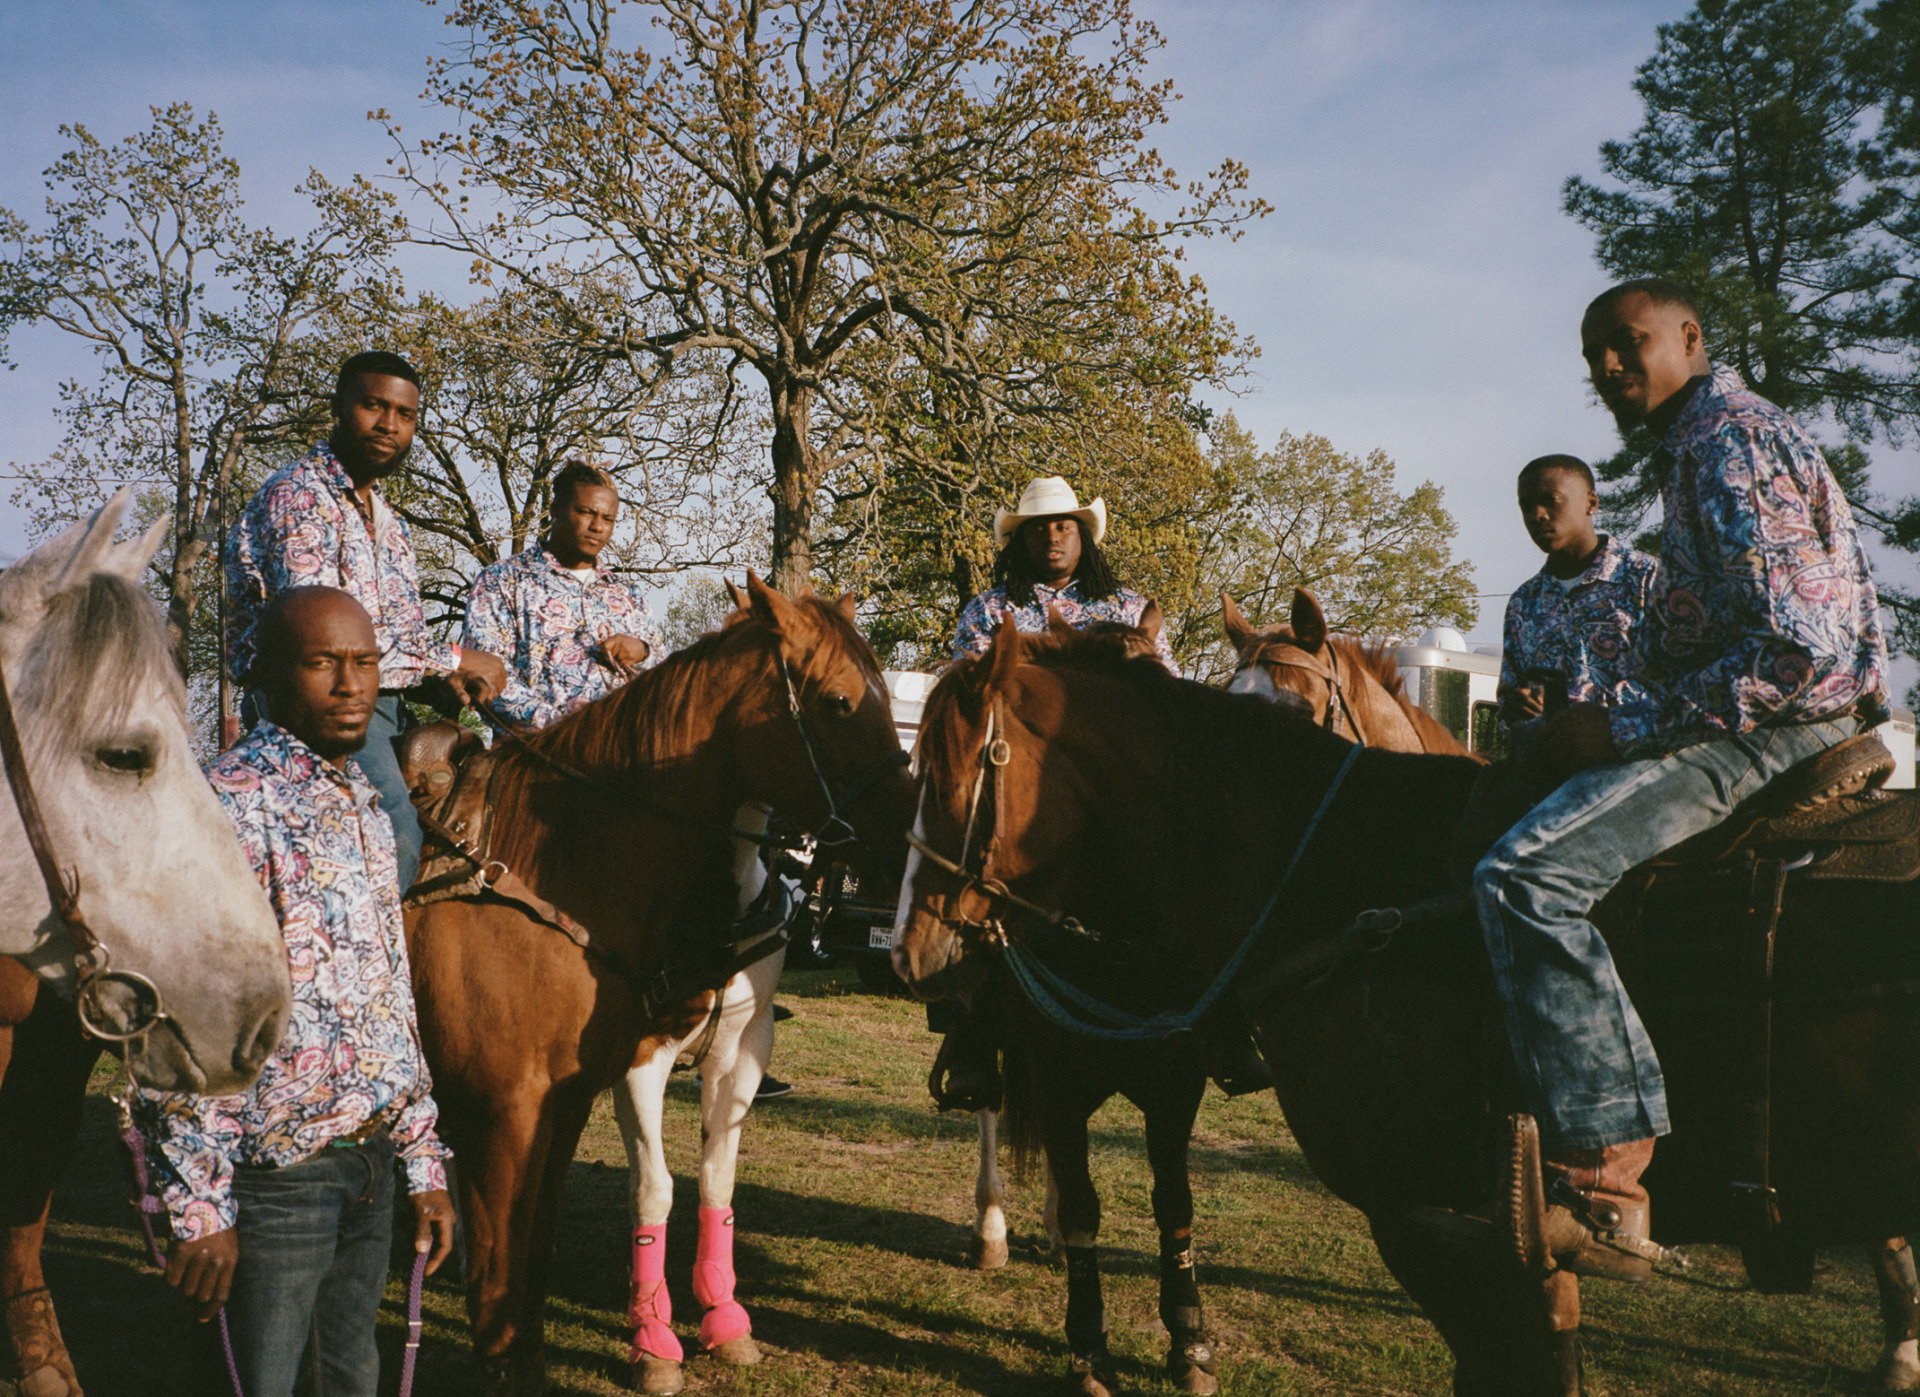 The Oklahoma Cowboys Are Mighty and They Want Black Youth to Feel Equally Empowered Through Their Heritage thumbnail